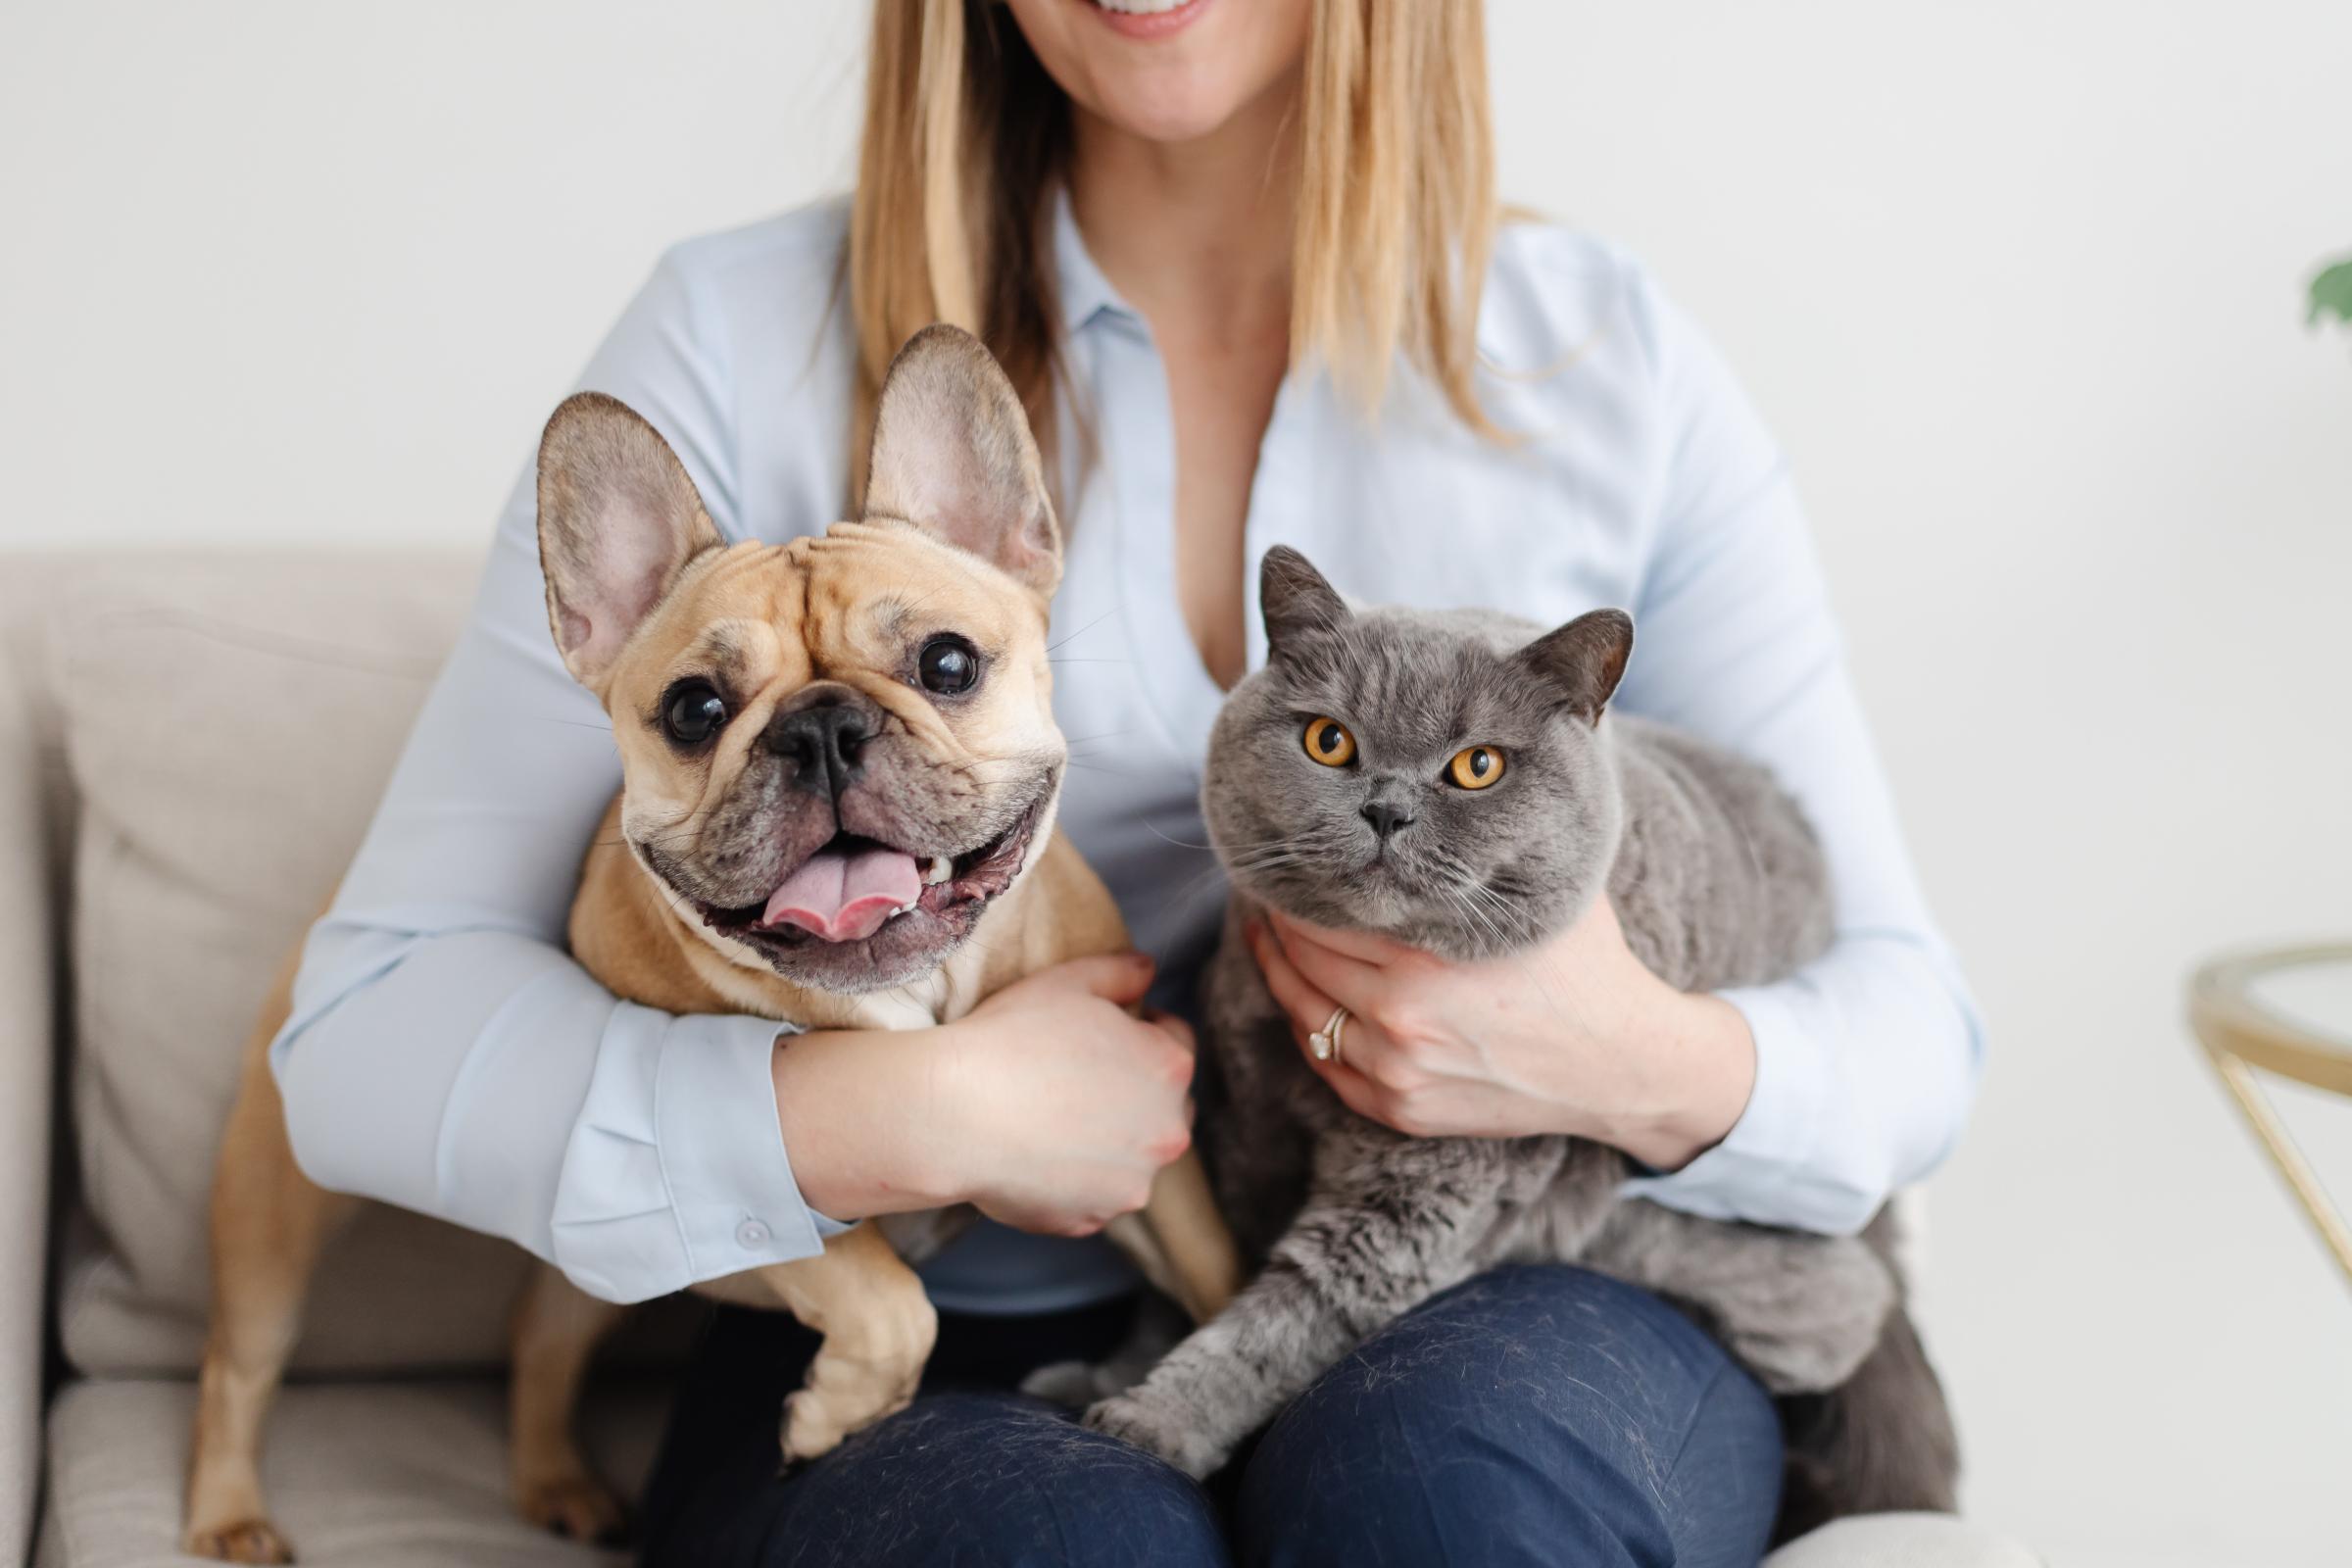 Dr. Hamil holding a french bulldog and a cat on her lap.